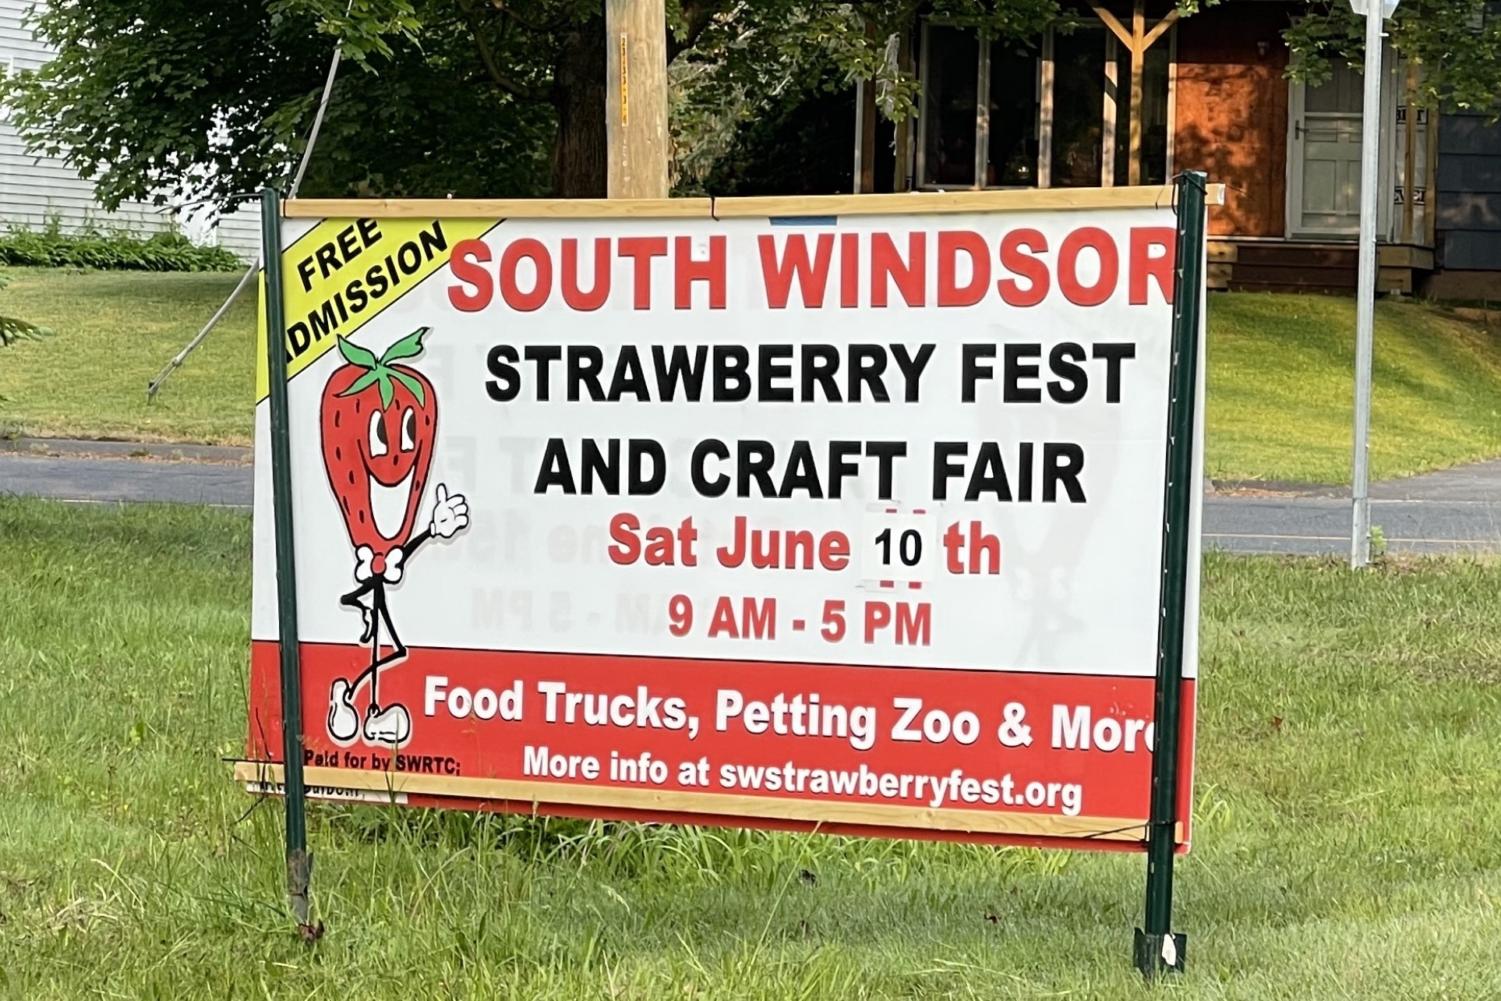 South Windsor Strawberry Festival Preview The Bobcat Prowl